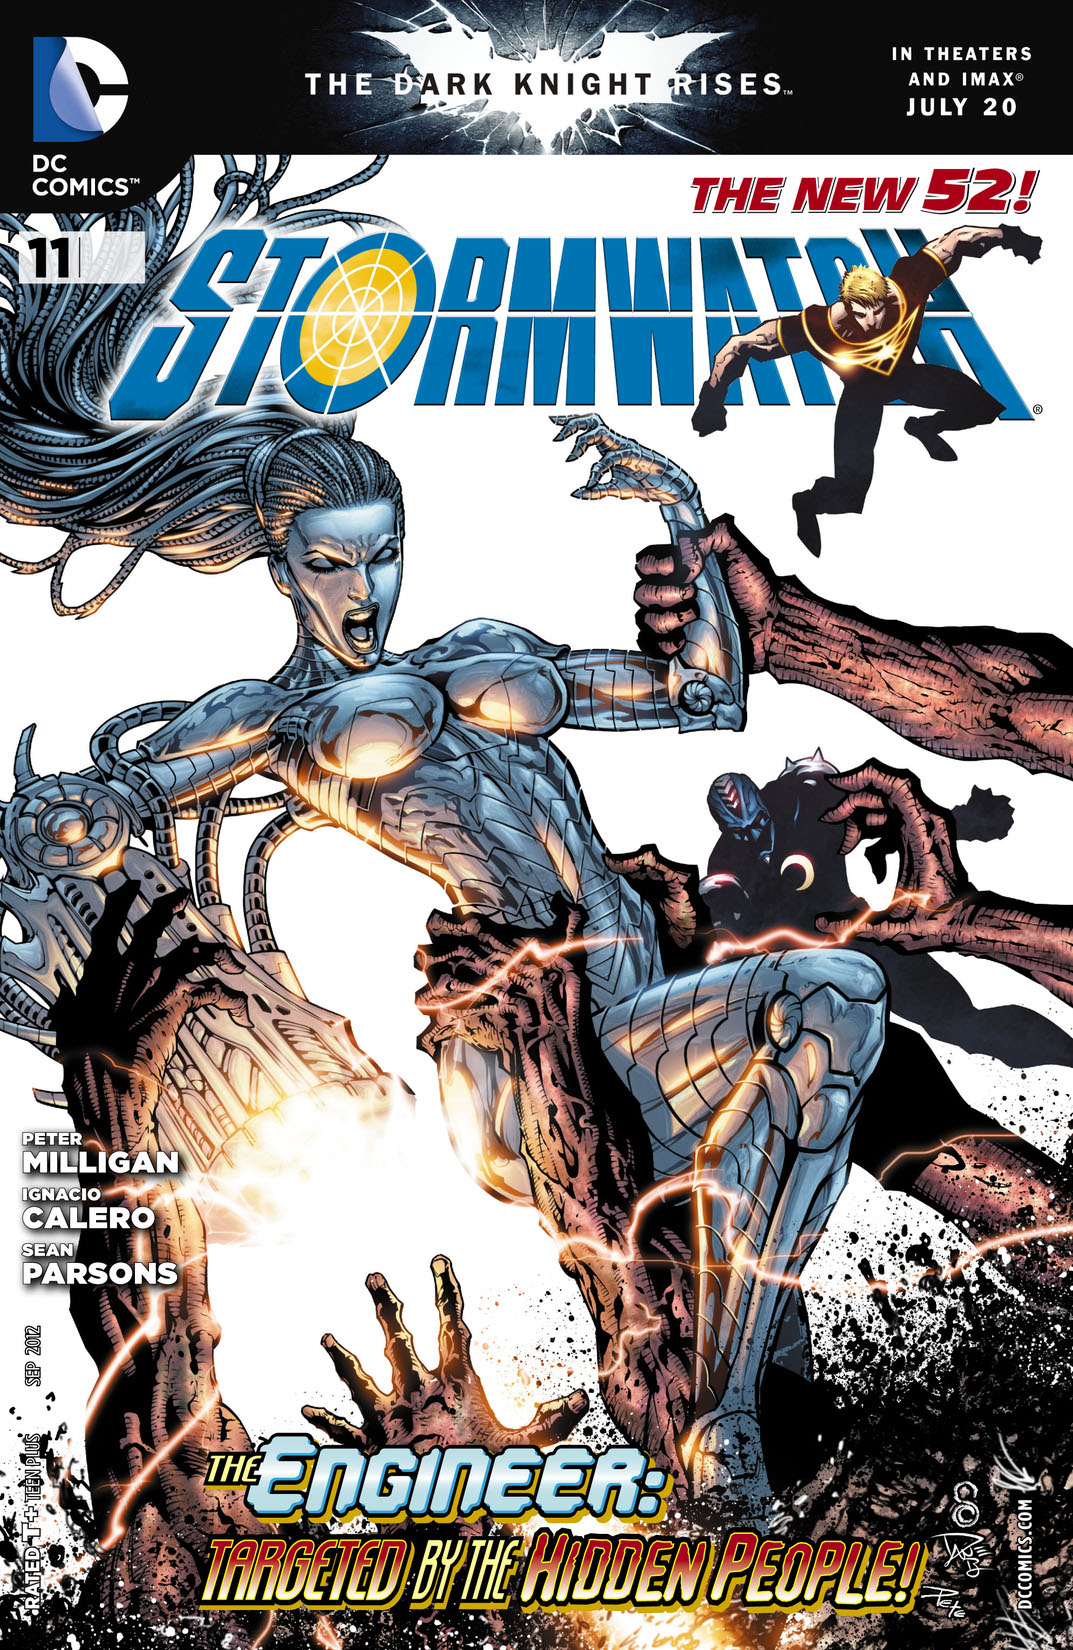 Stormwatch (2011-) #11 preview images